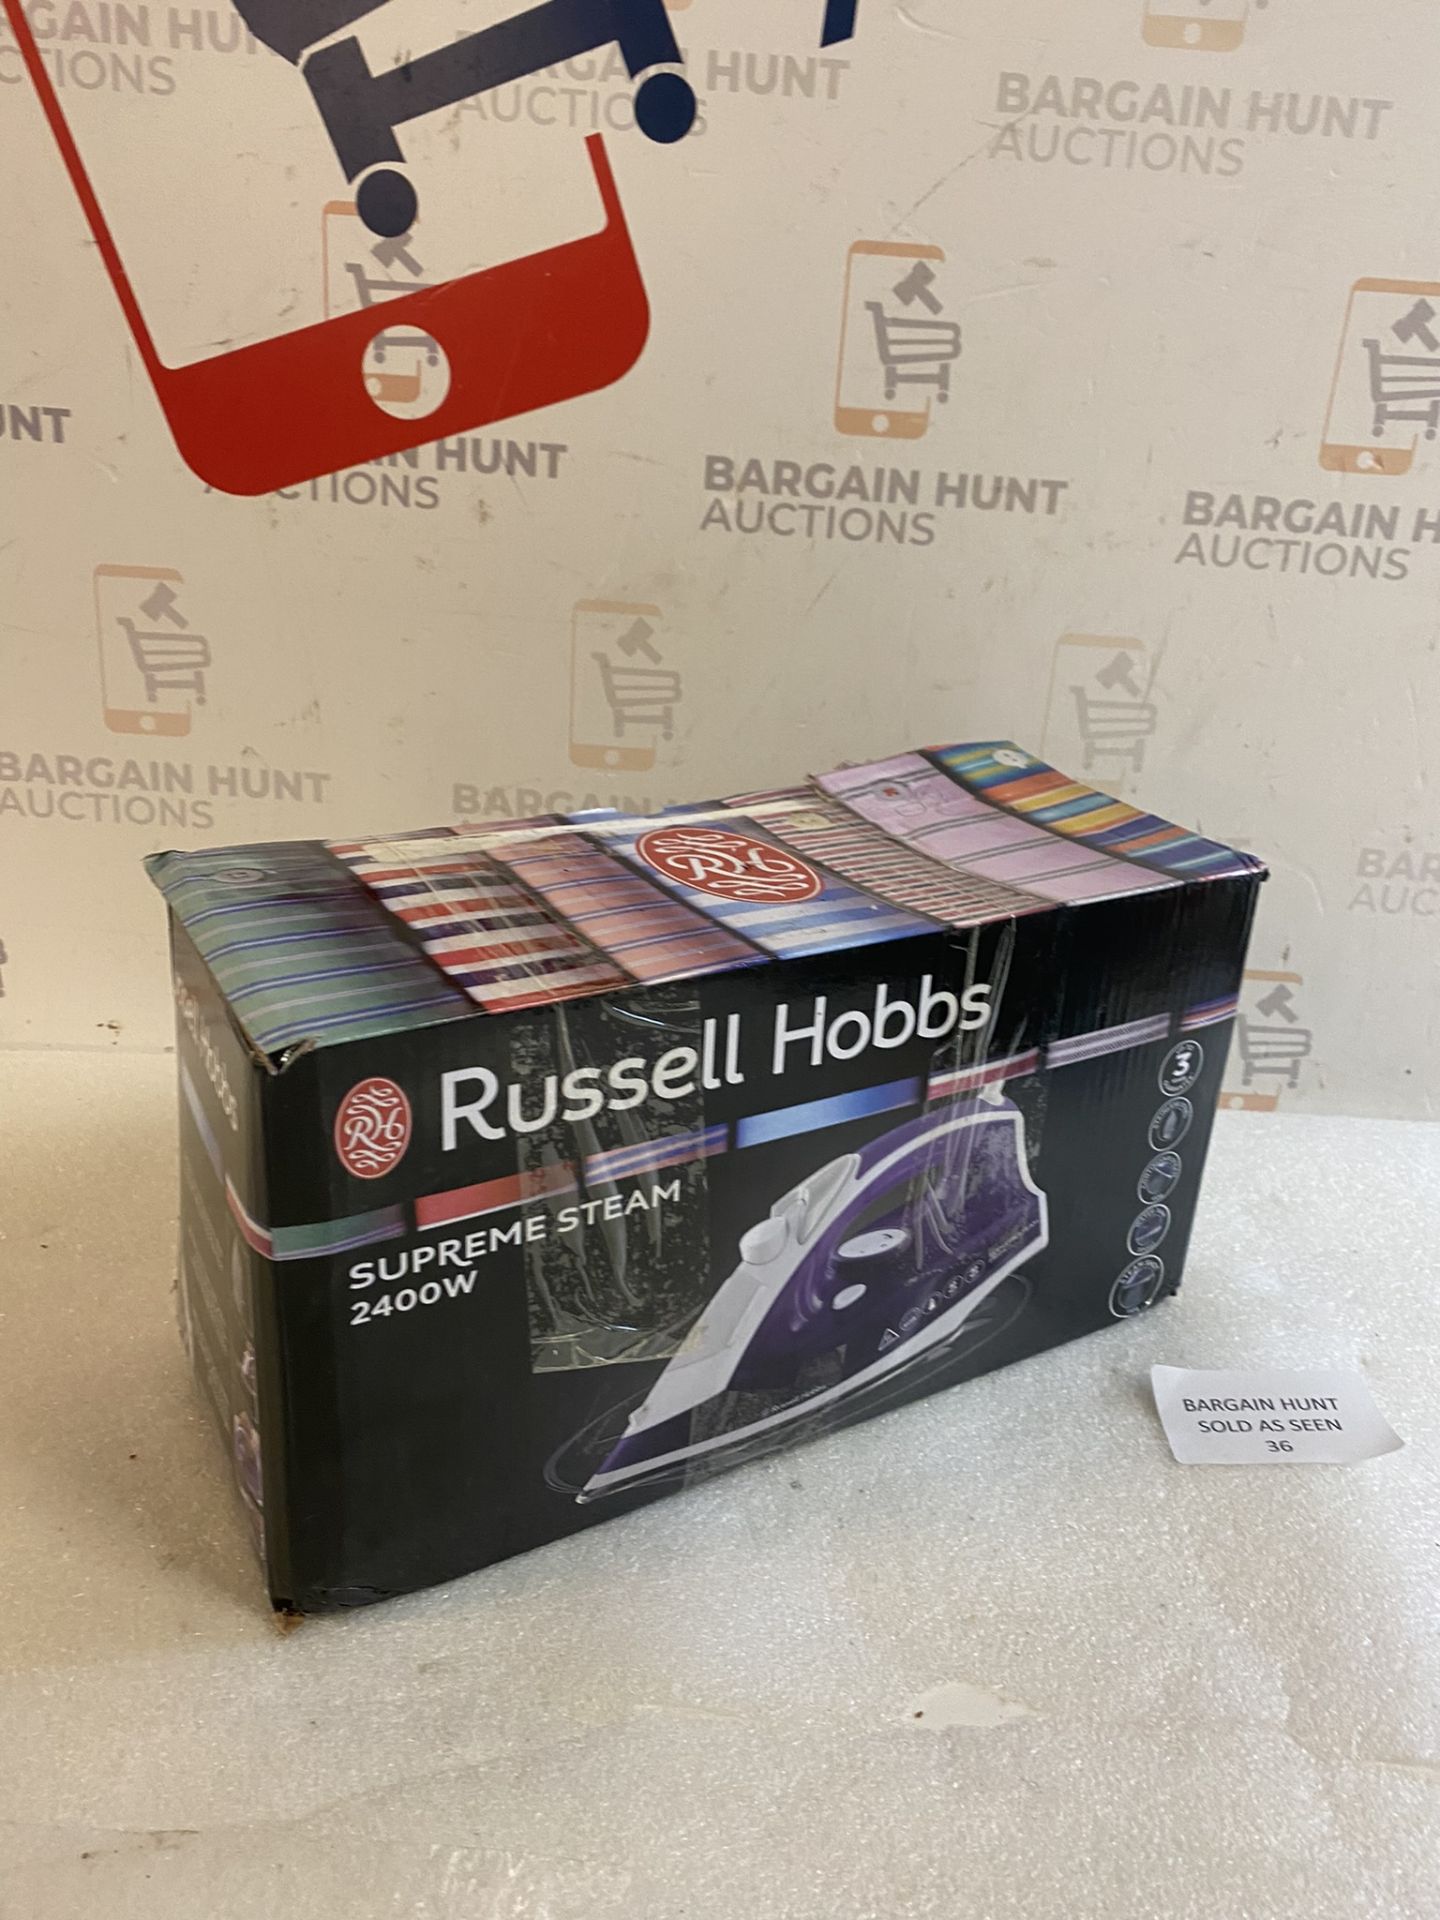 Russell Hobbs 23060 Supreme Steam Traditional Iron RRP £22.99